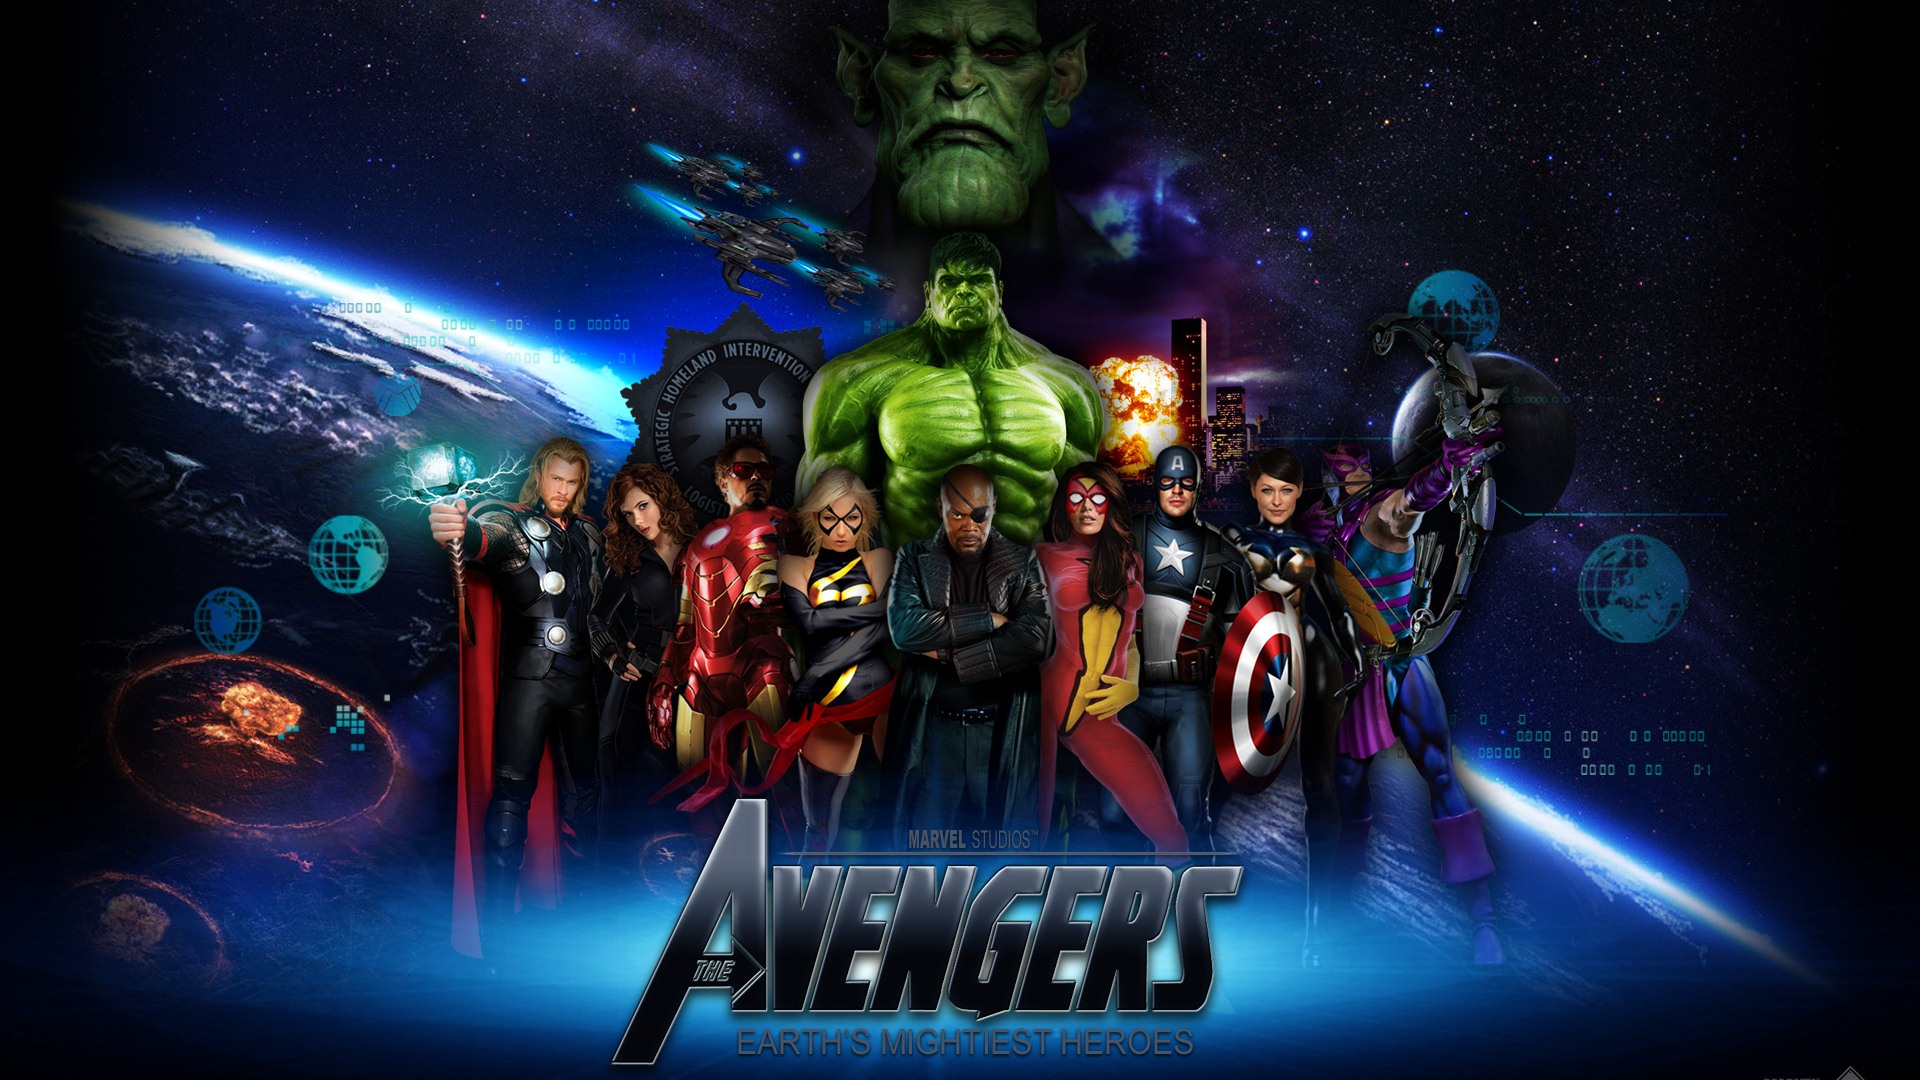 The Avengers 2012 HD wallpapers #12 - 1920x1080